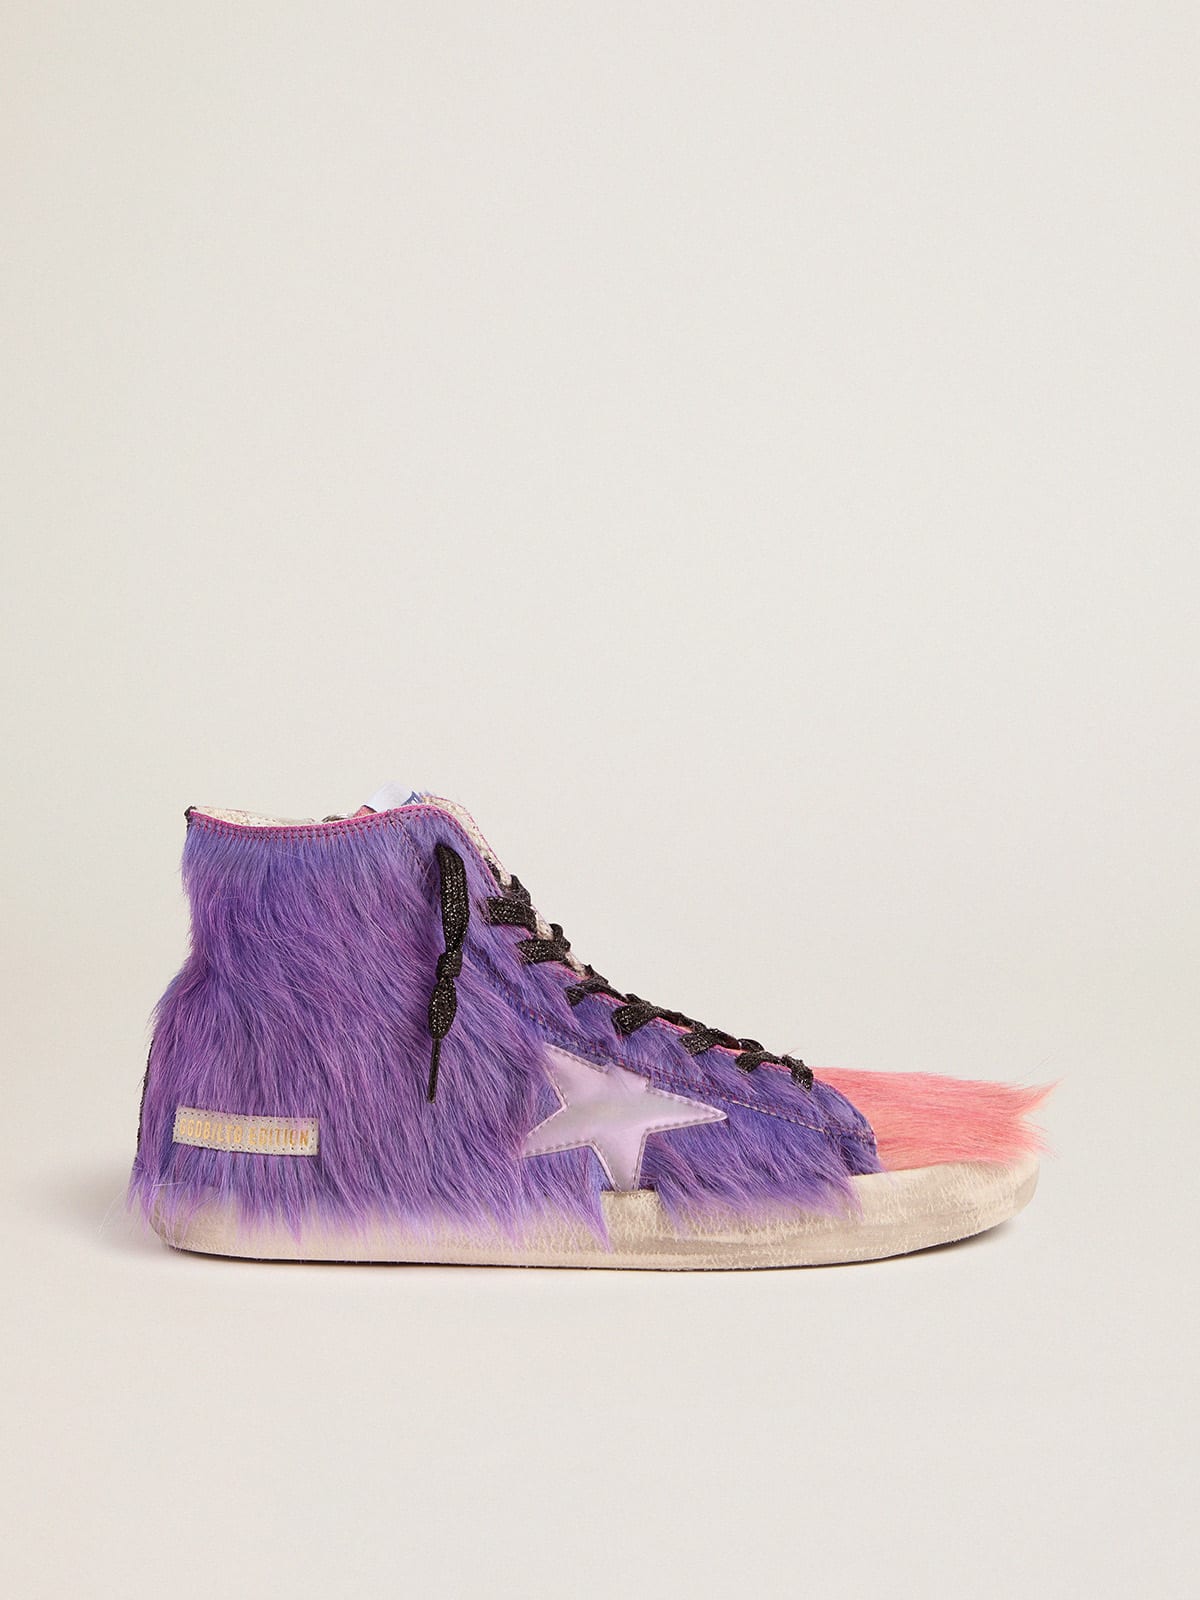 Men's Limited Edition lilac and pink pony Francy sneakers | Golden Goose